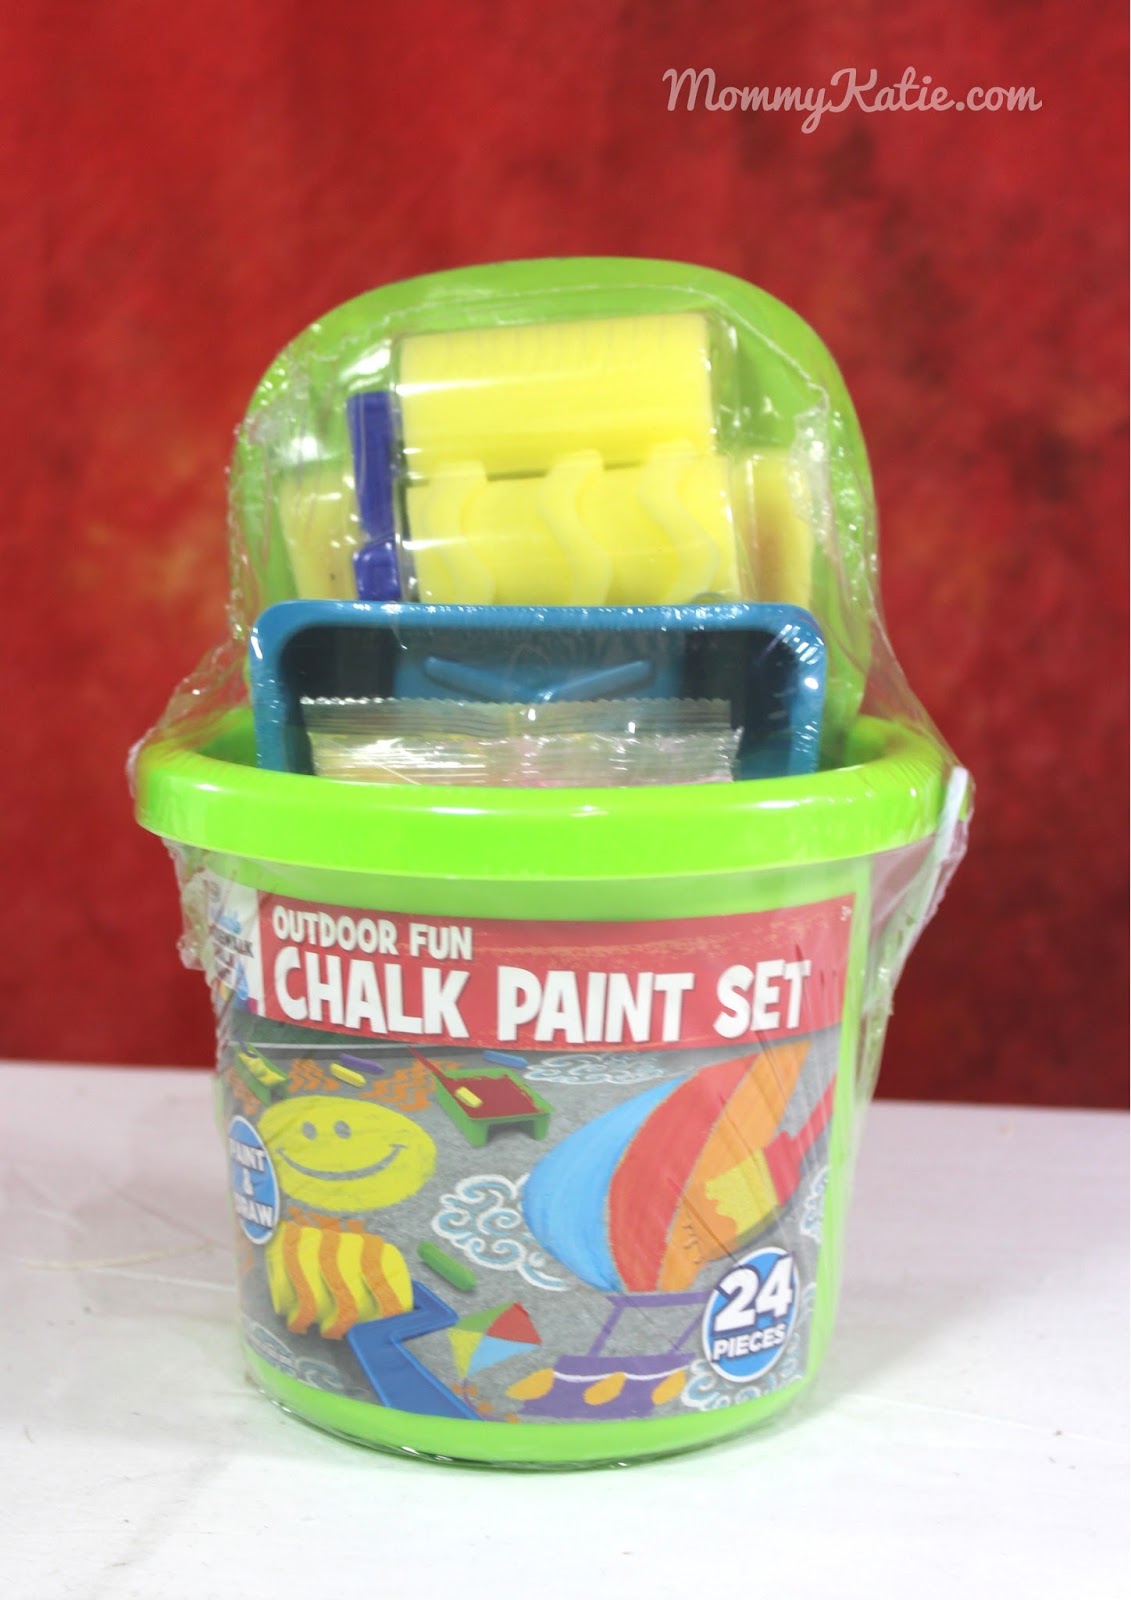 #Giveaway Outdoor Creative Fun with RoseArt Chalk Paint